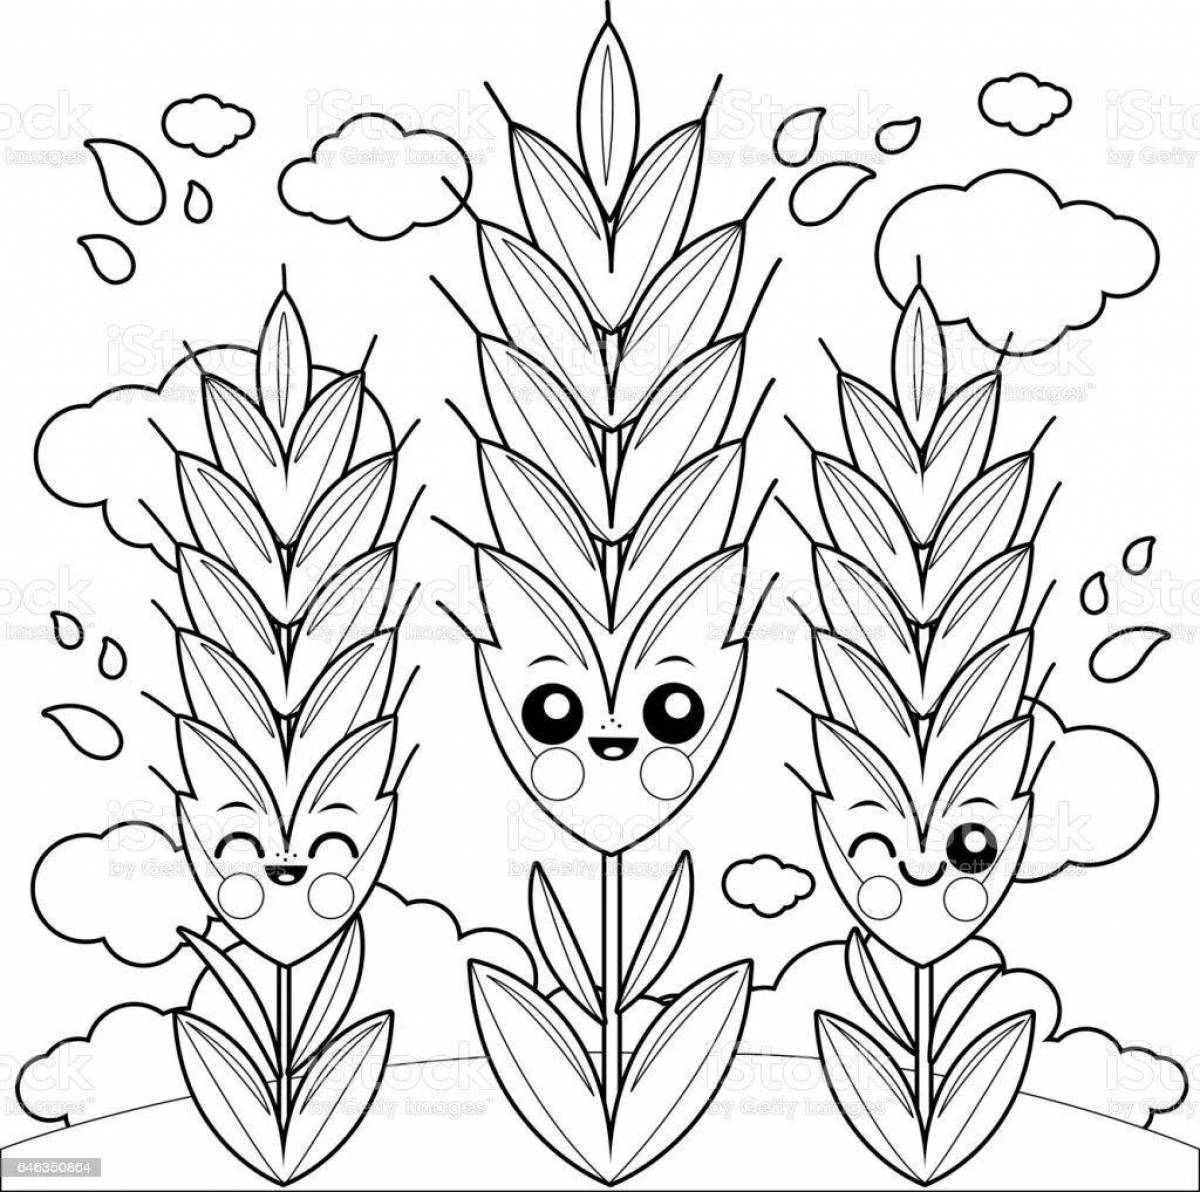 Coloring page dazzling corn